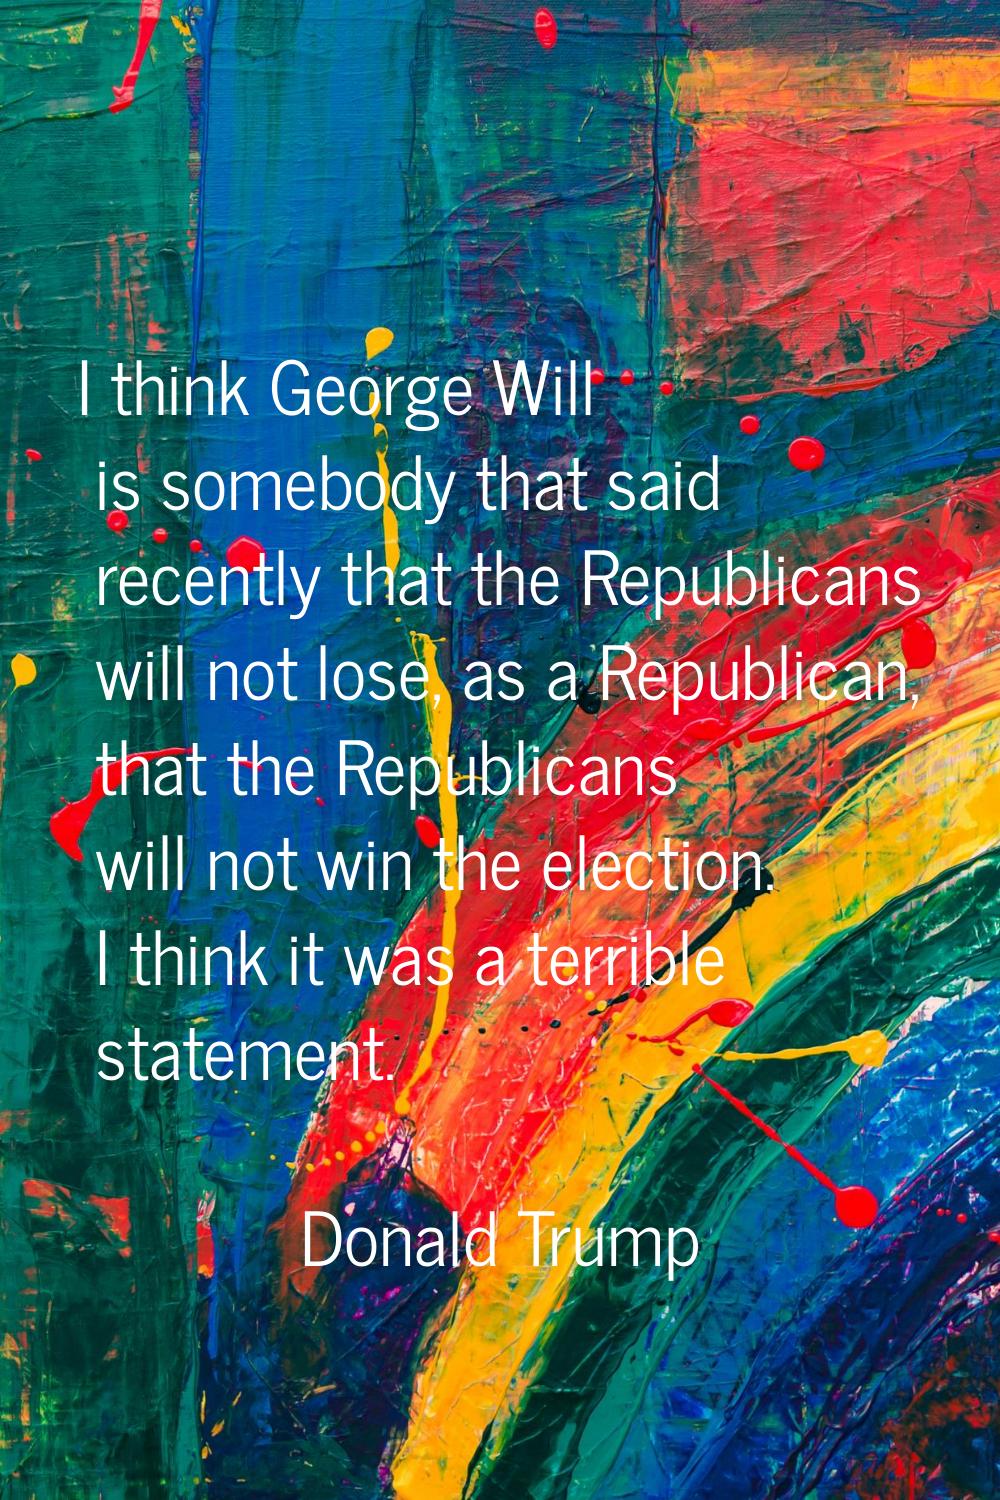 I think George Will is somebody that said recently that the Republicans will not lose, as a Republi